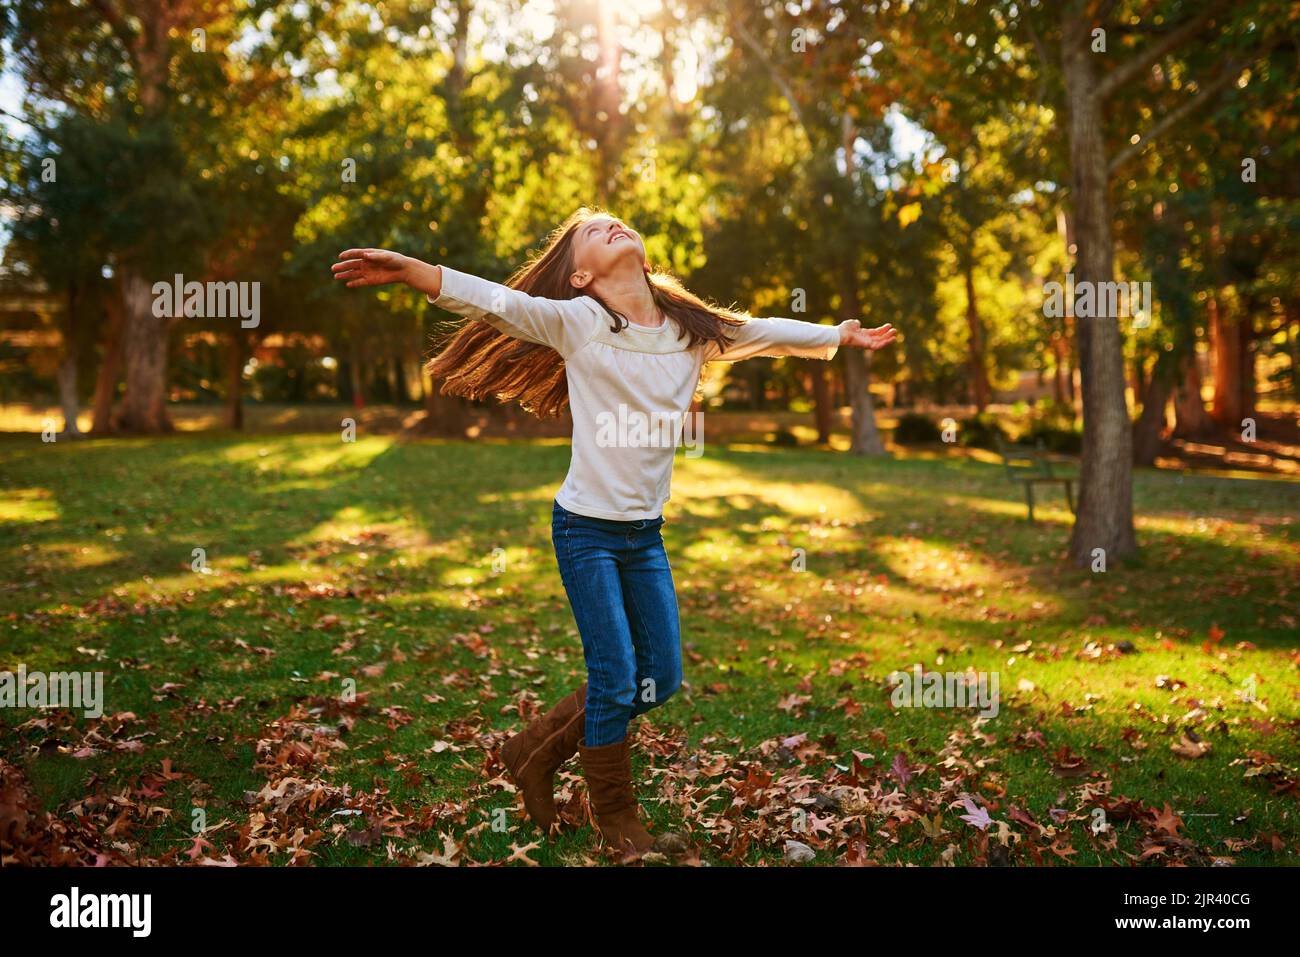 Leaf it to kids to make the most of life. a happy little girl playing in the autumn leaves outdoors. Stock Photo